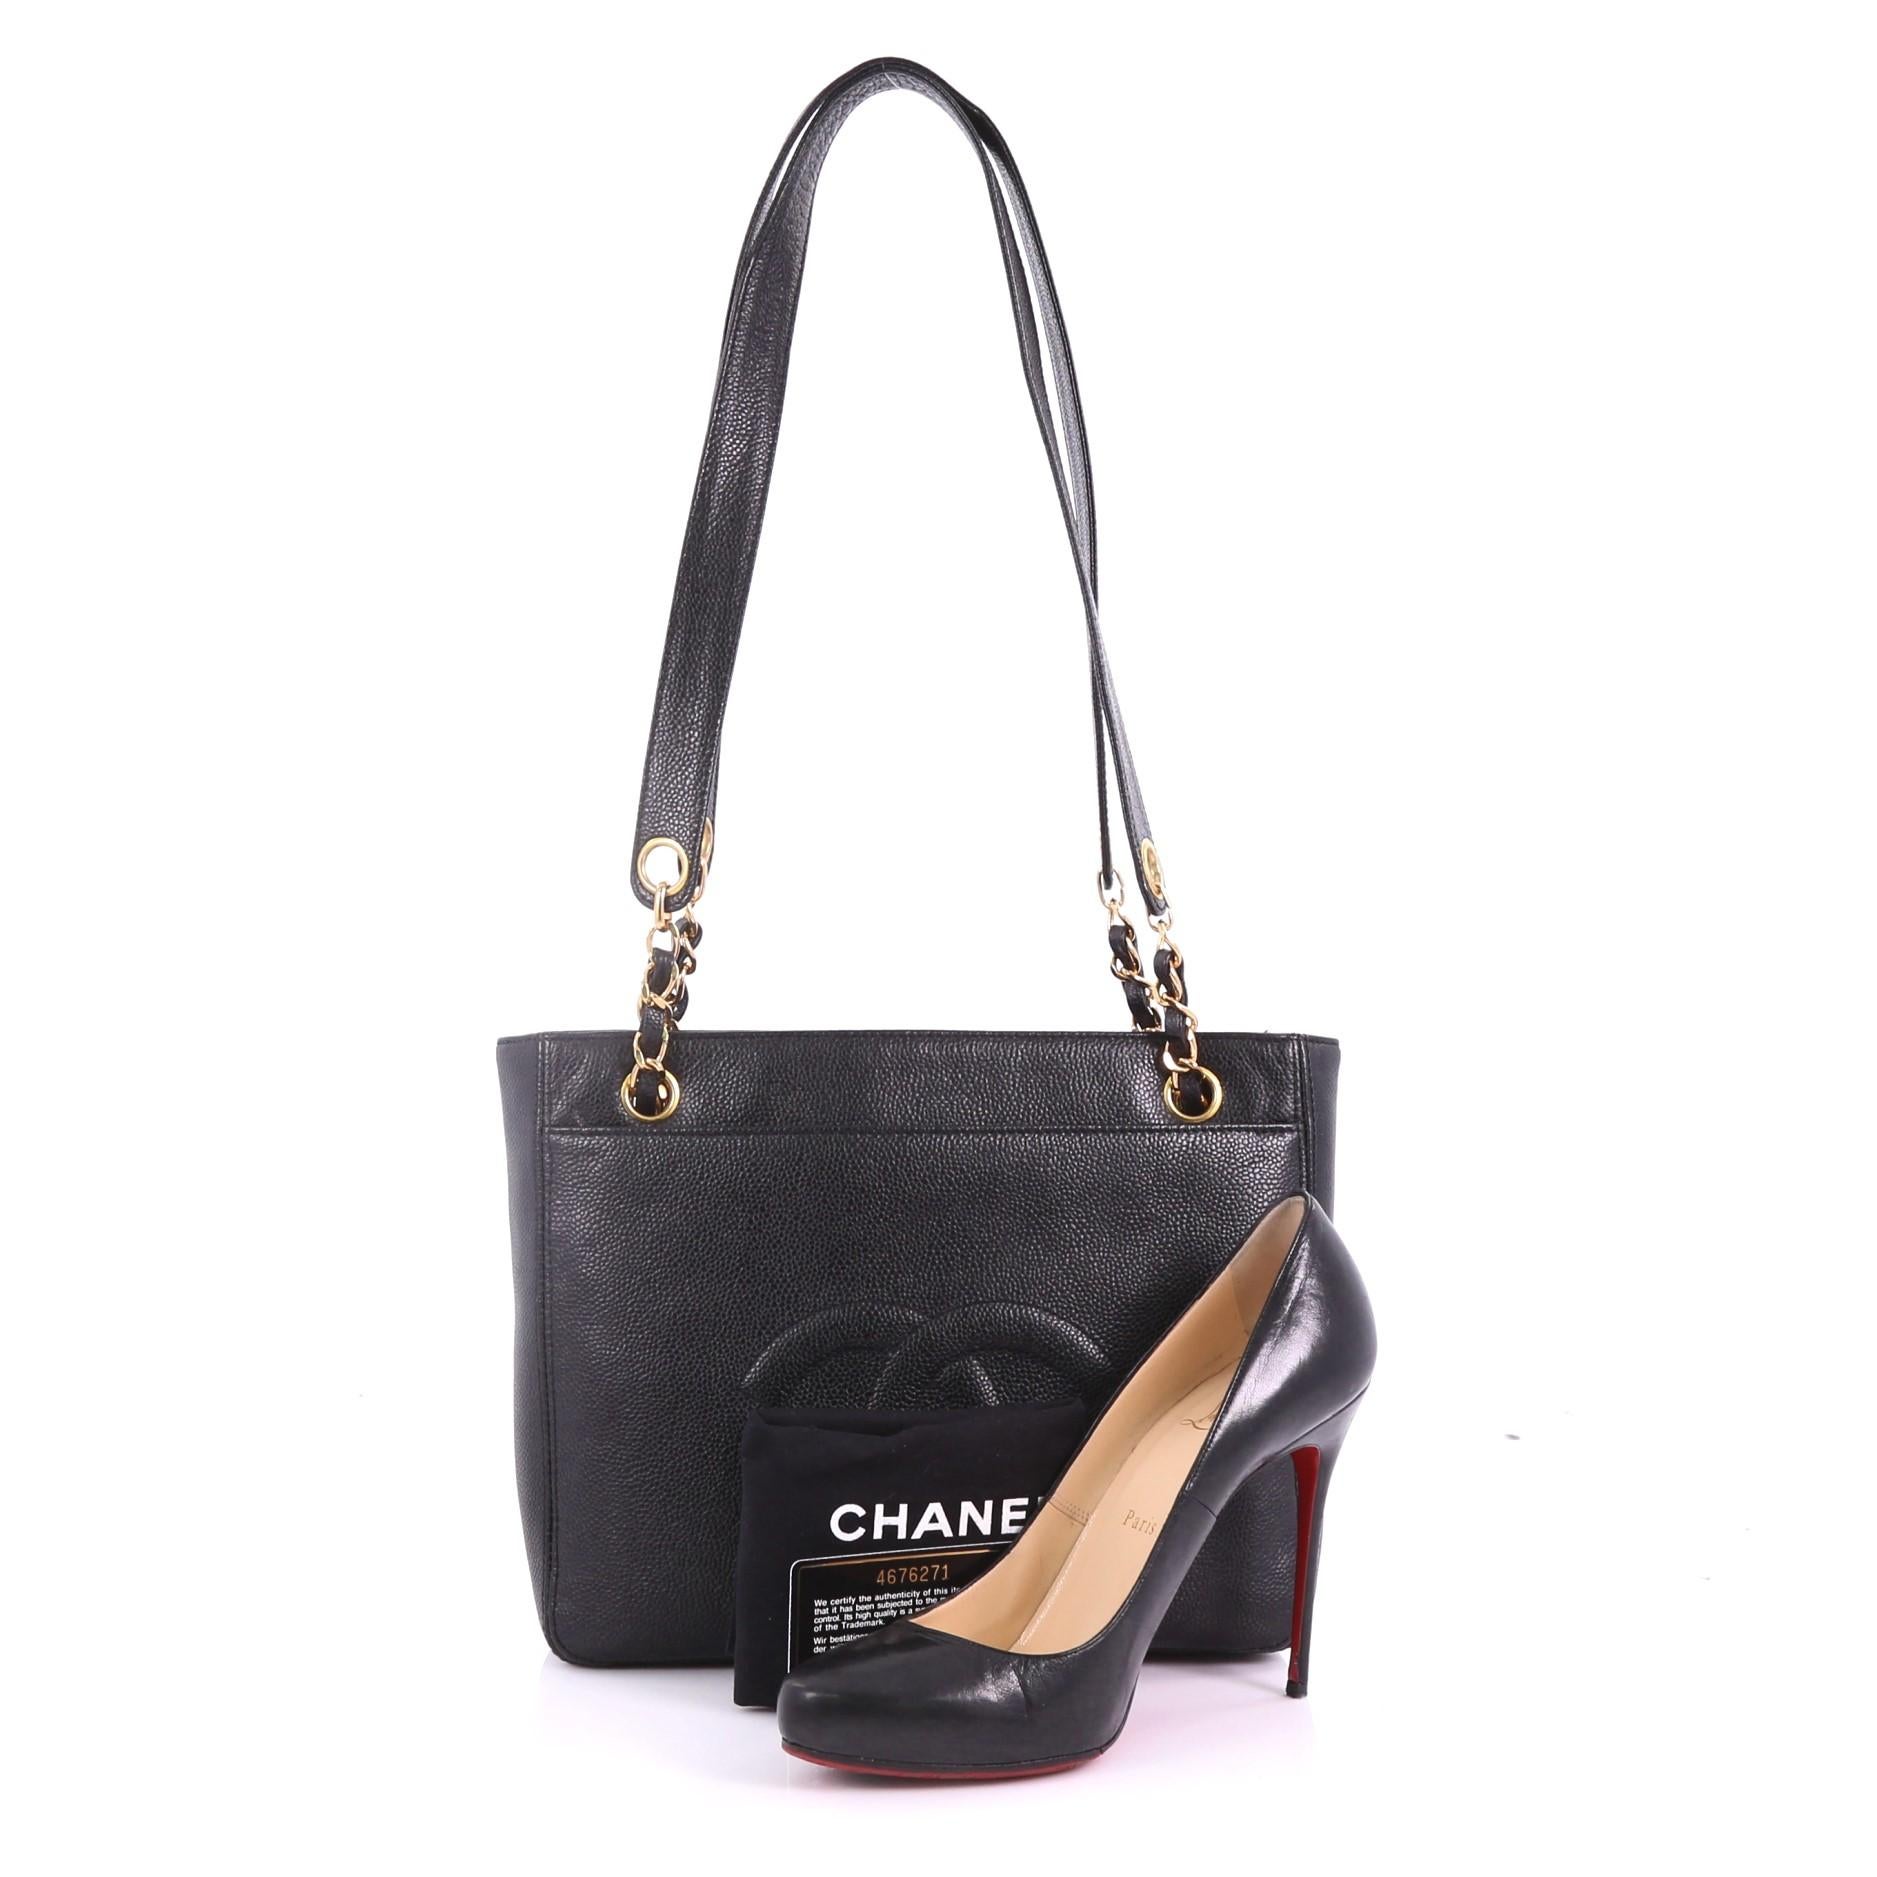 This Chanel Vintage Front Pocket Tote Caviar Small, crafted from black caviar leather, features woven-in chain and leather straps, front flap with CC turn-lock closure and gold-tone hardware. It opens to a black fabric interior with zip pocket.